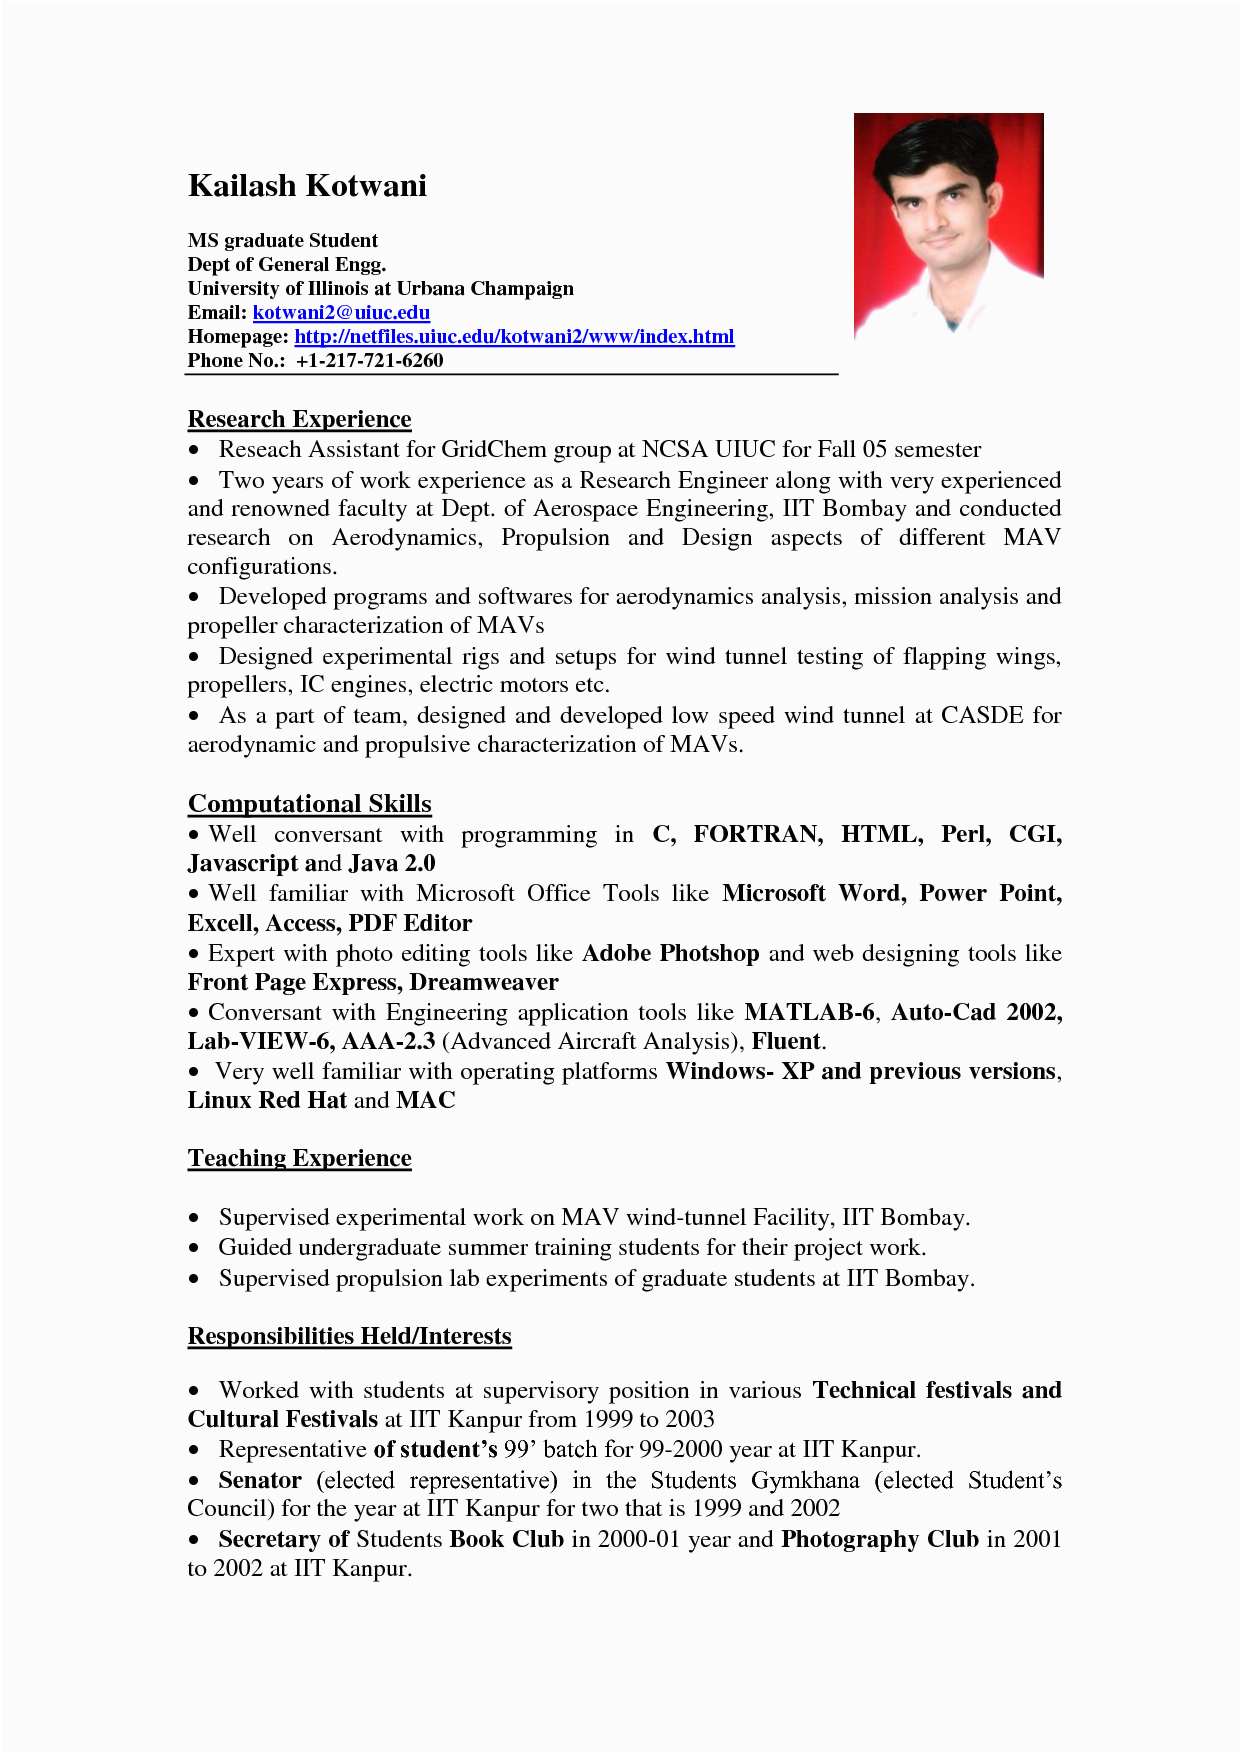 Sample Of Functional Resume with No Experience Best Resume format for Experienced Best Resume formats for 2020 3